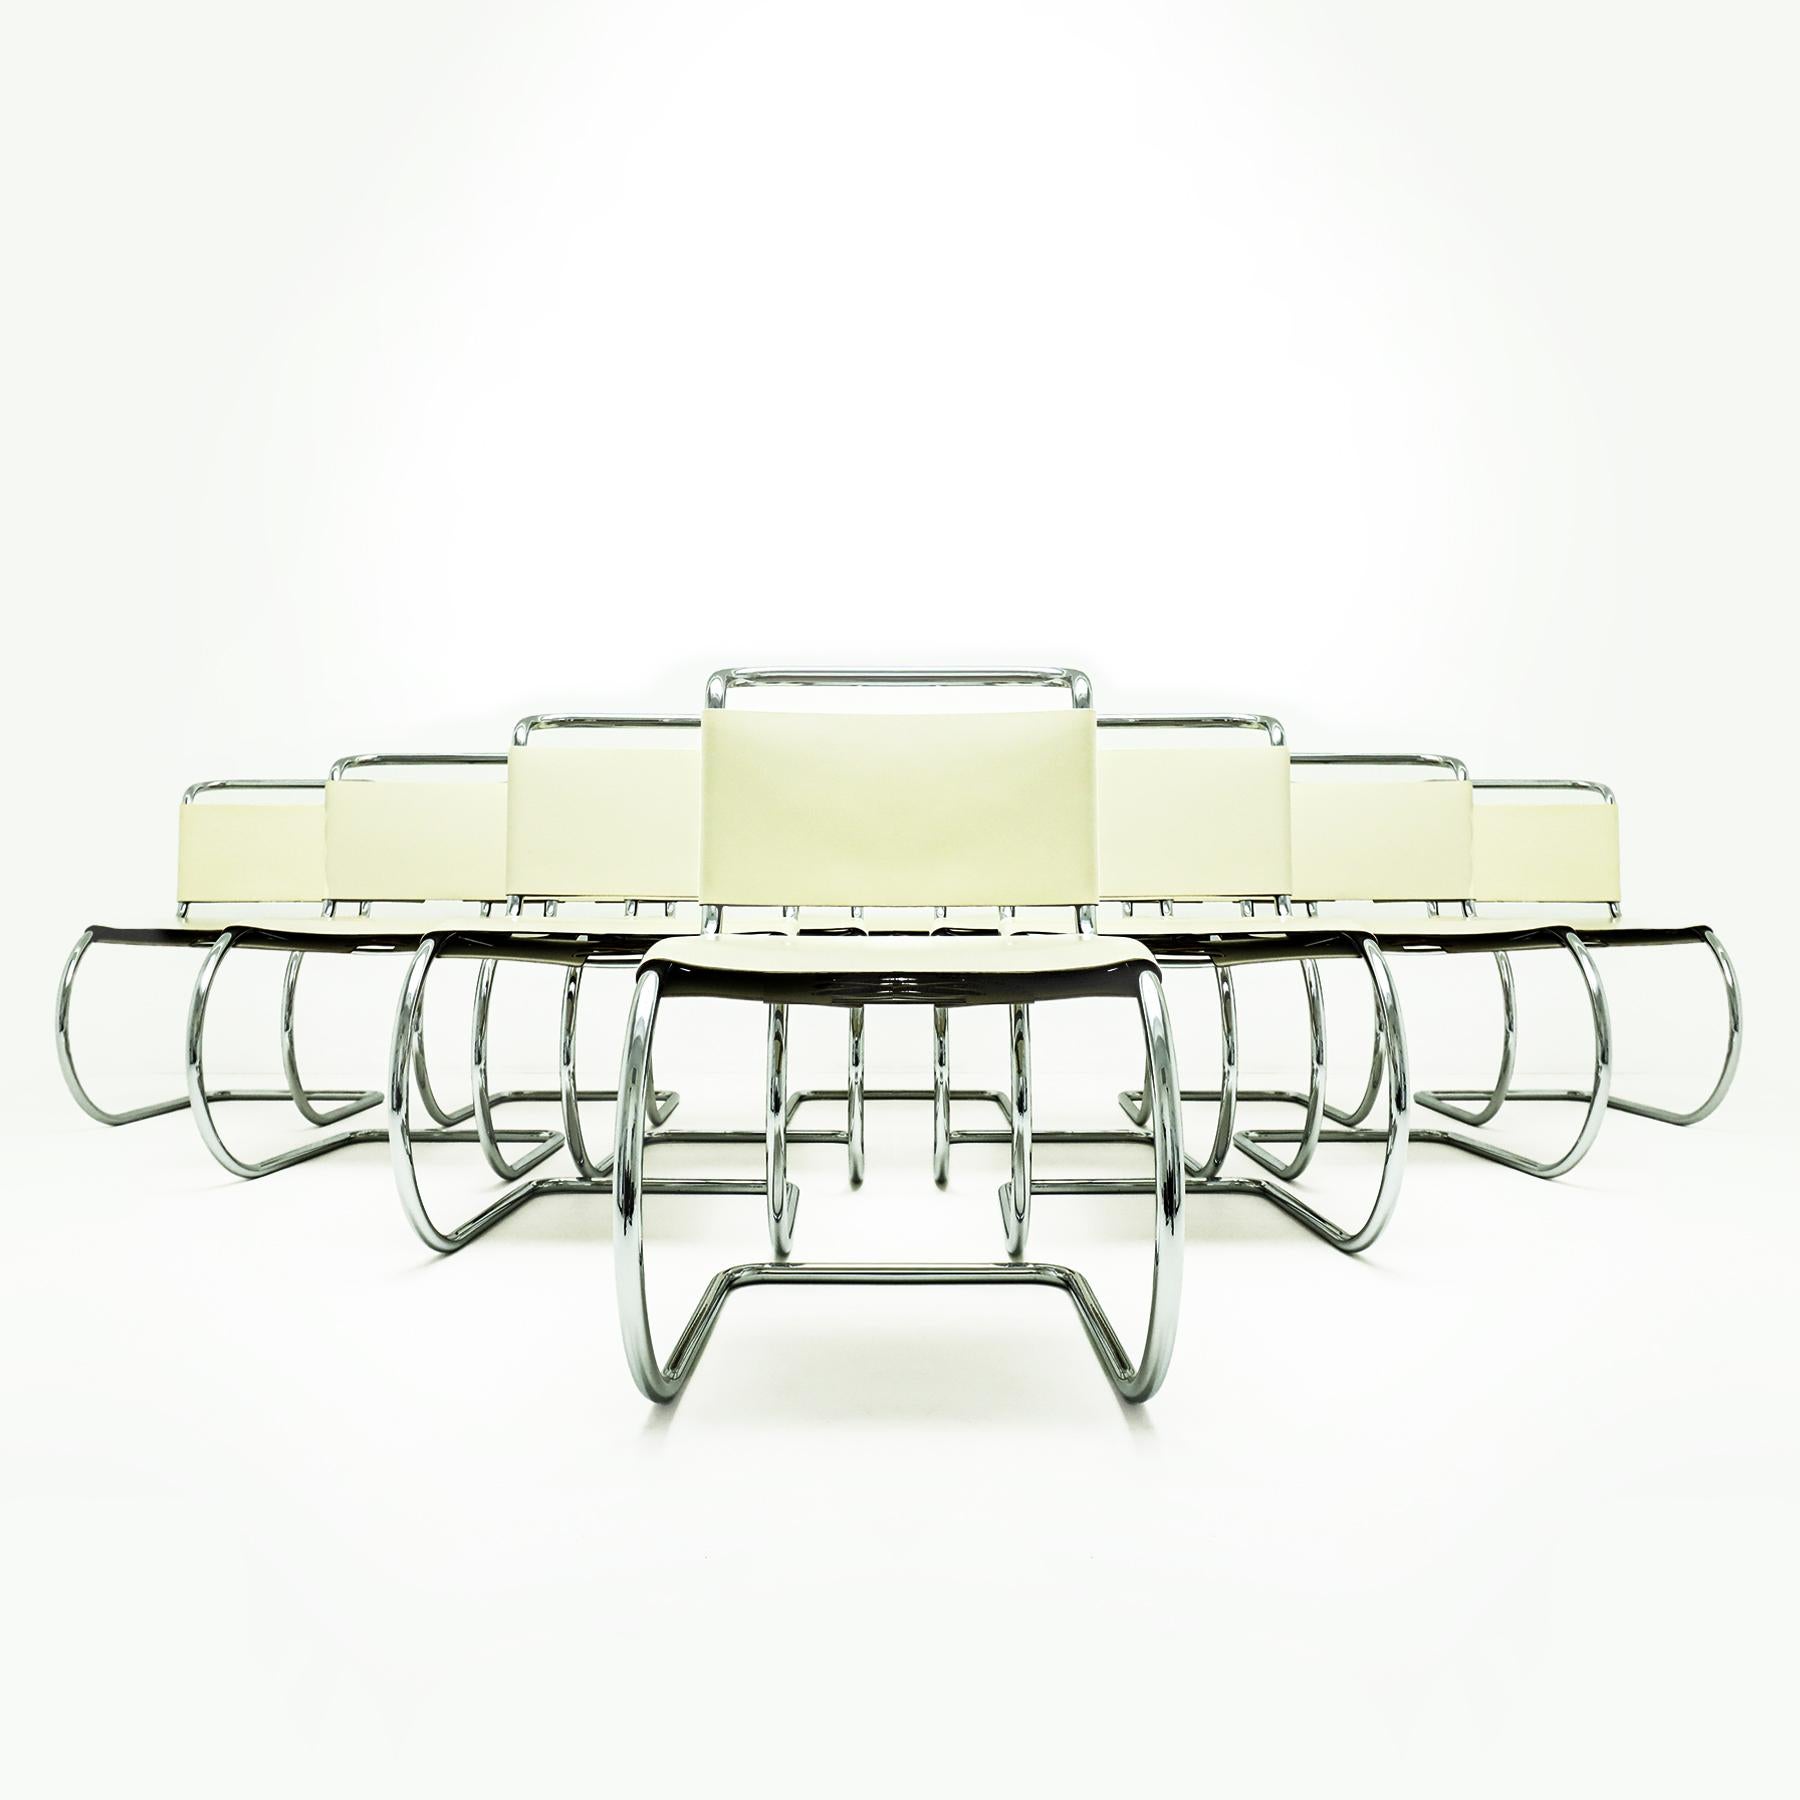 12 Knoll, Mies van der Rohe MR10 chairs matched to a Matteo Grassi dining table 6